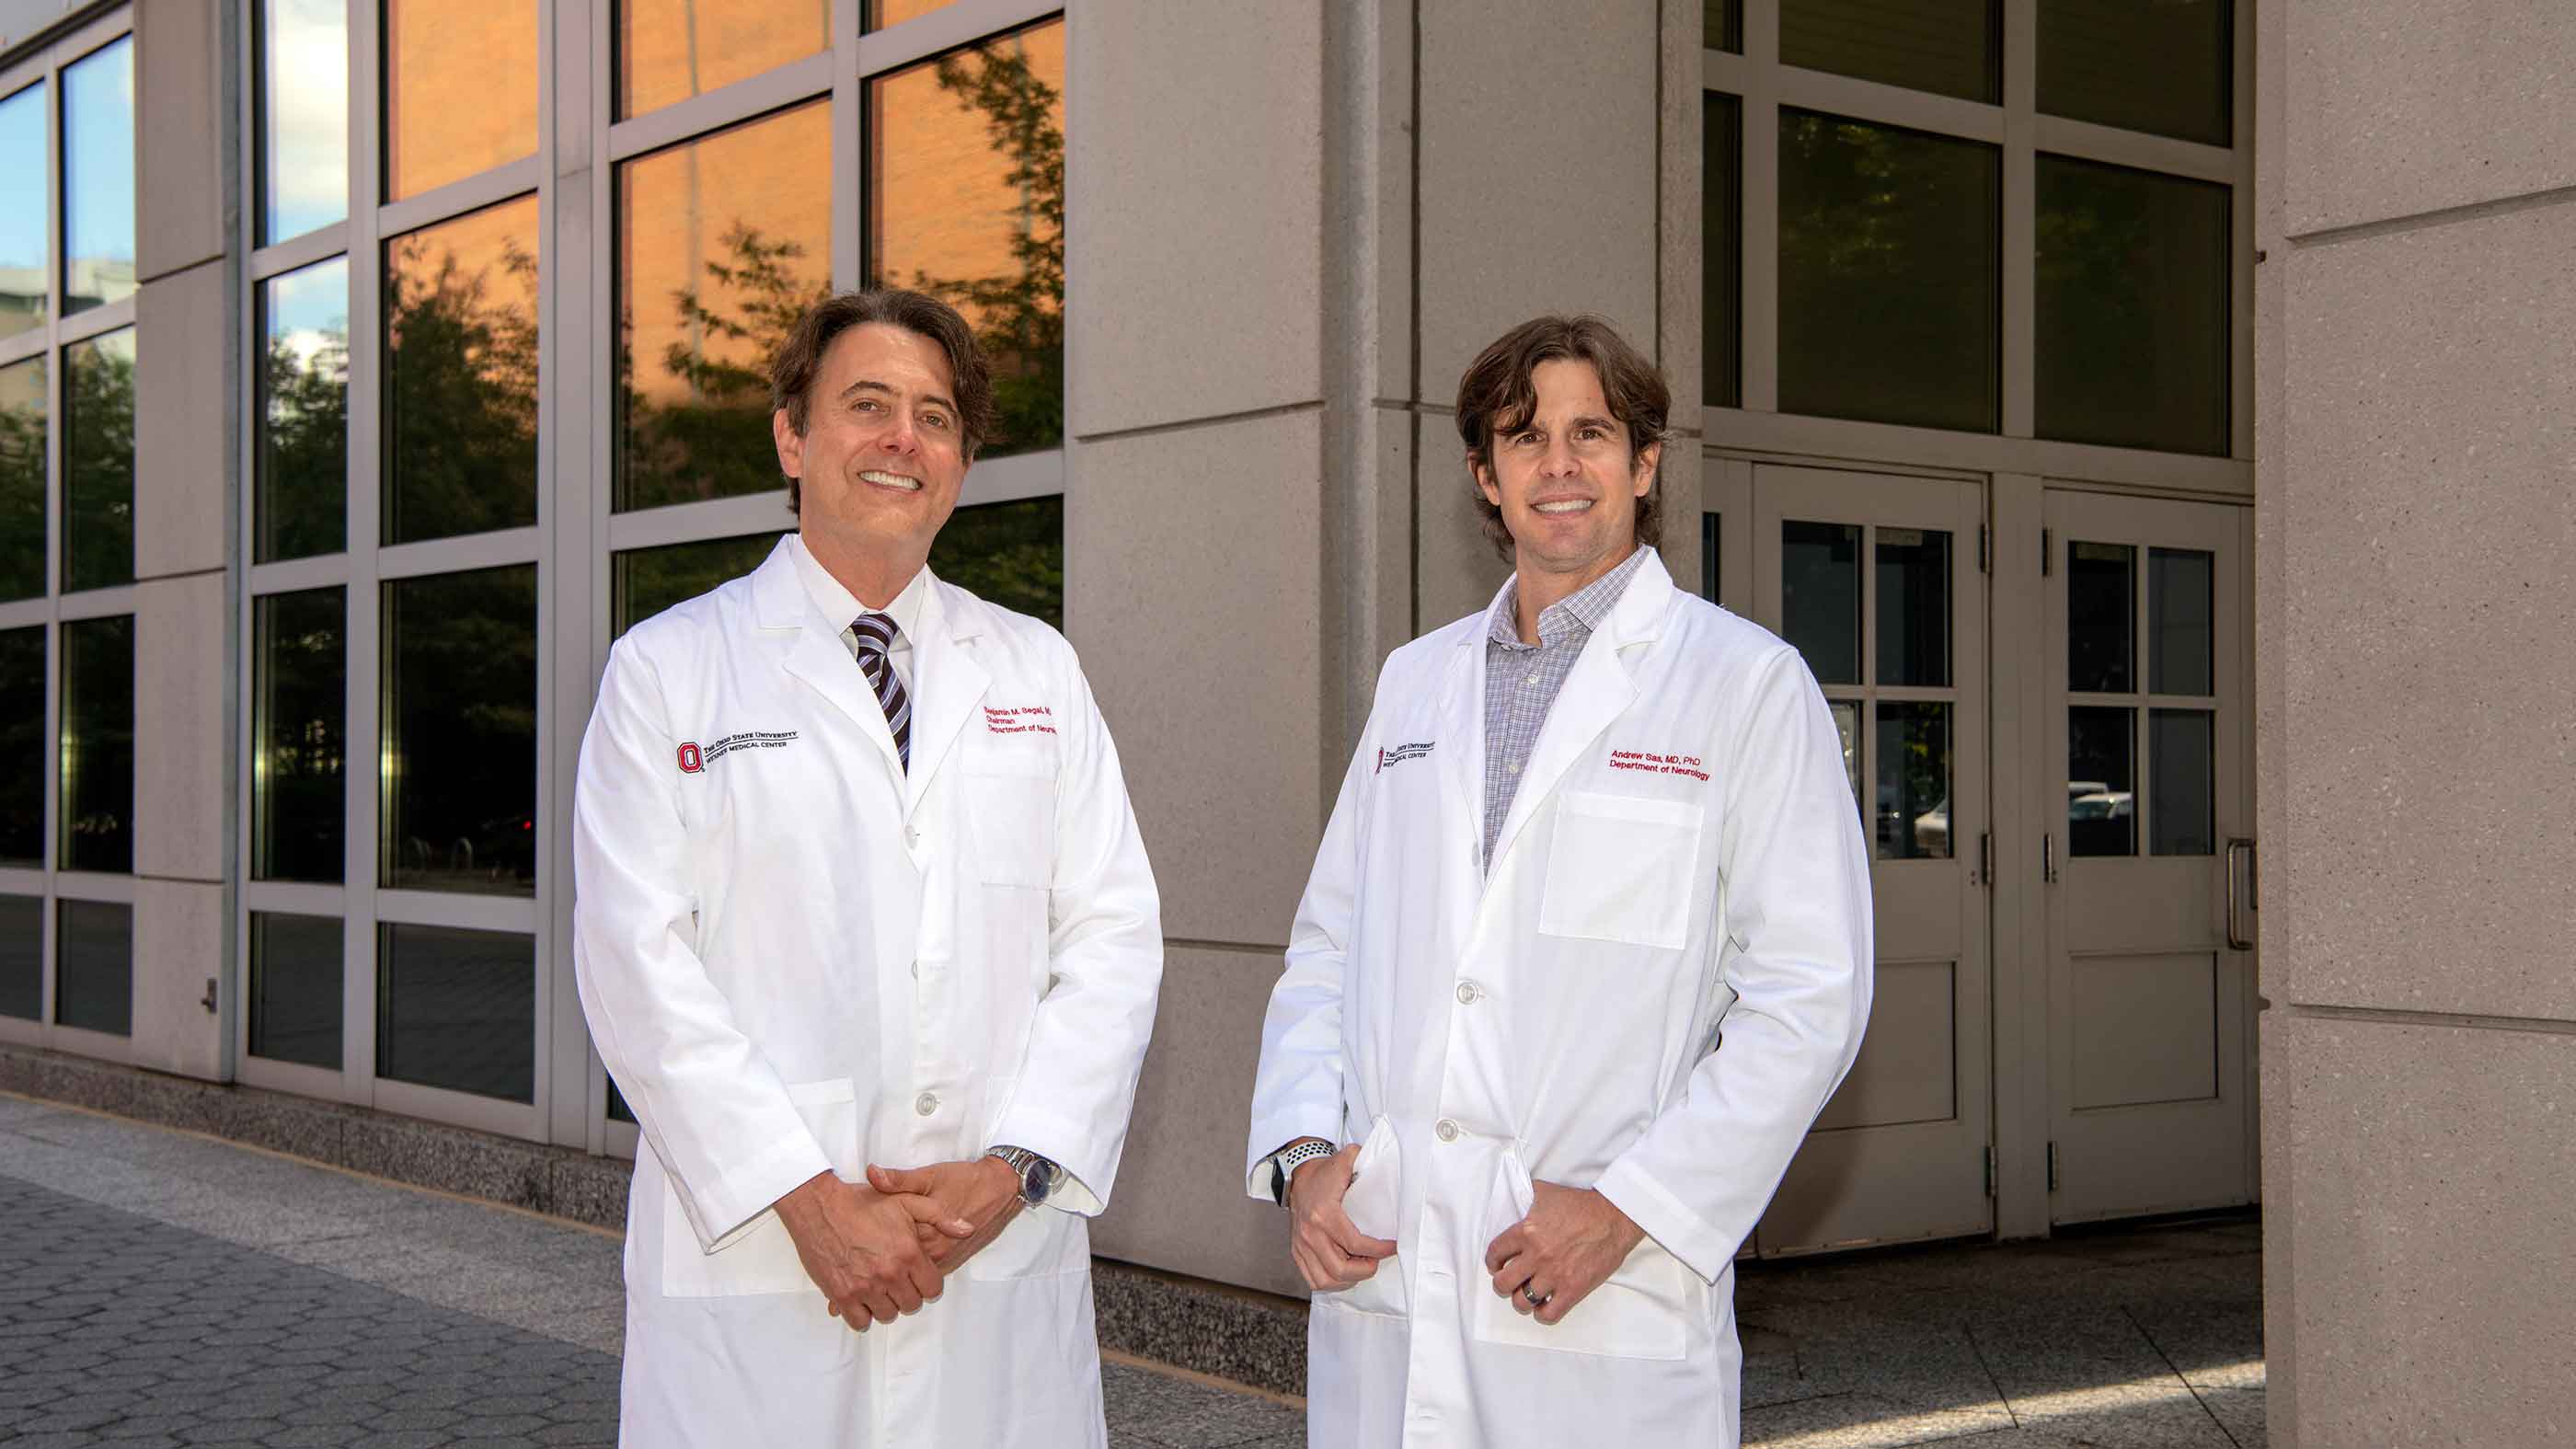 Dr. Segal and Dr. Sas outside